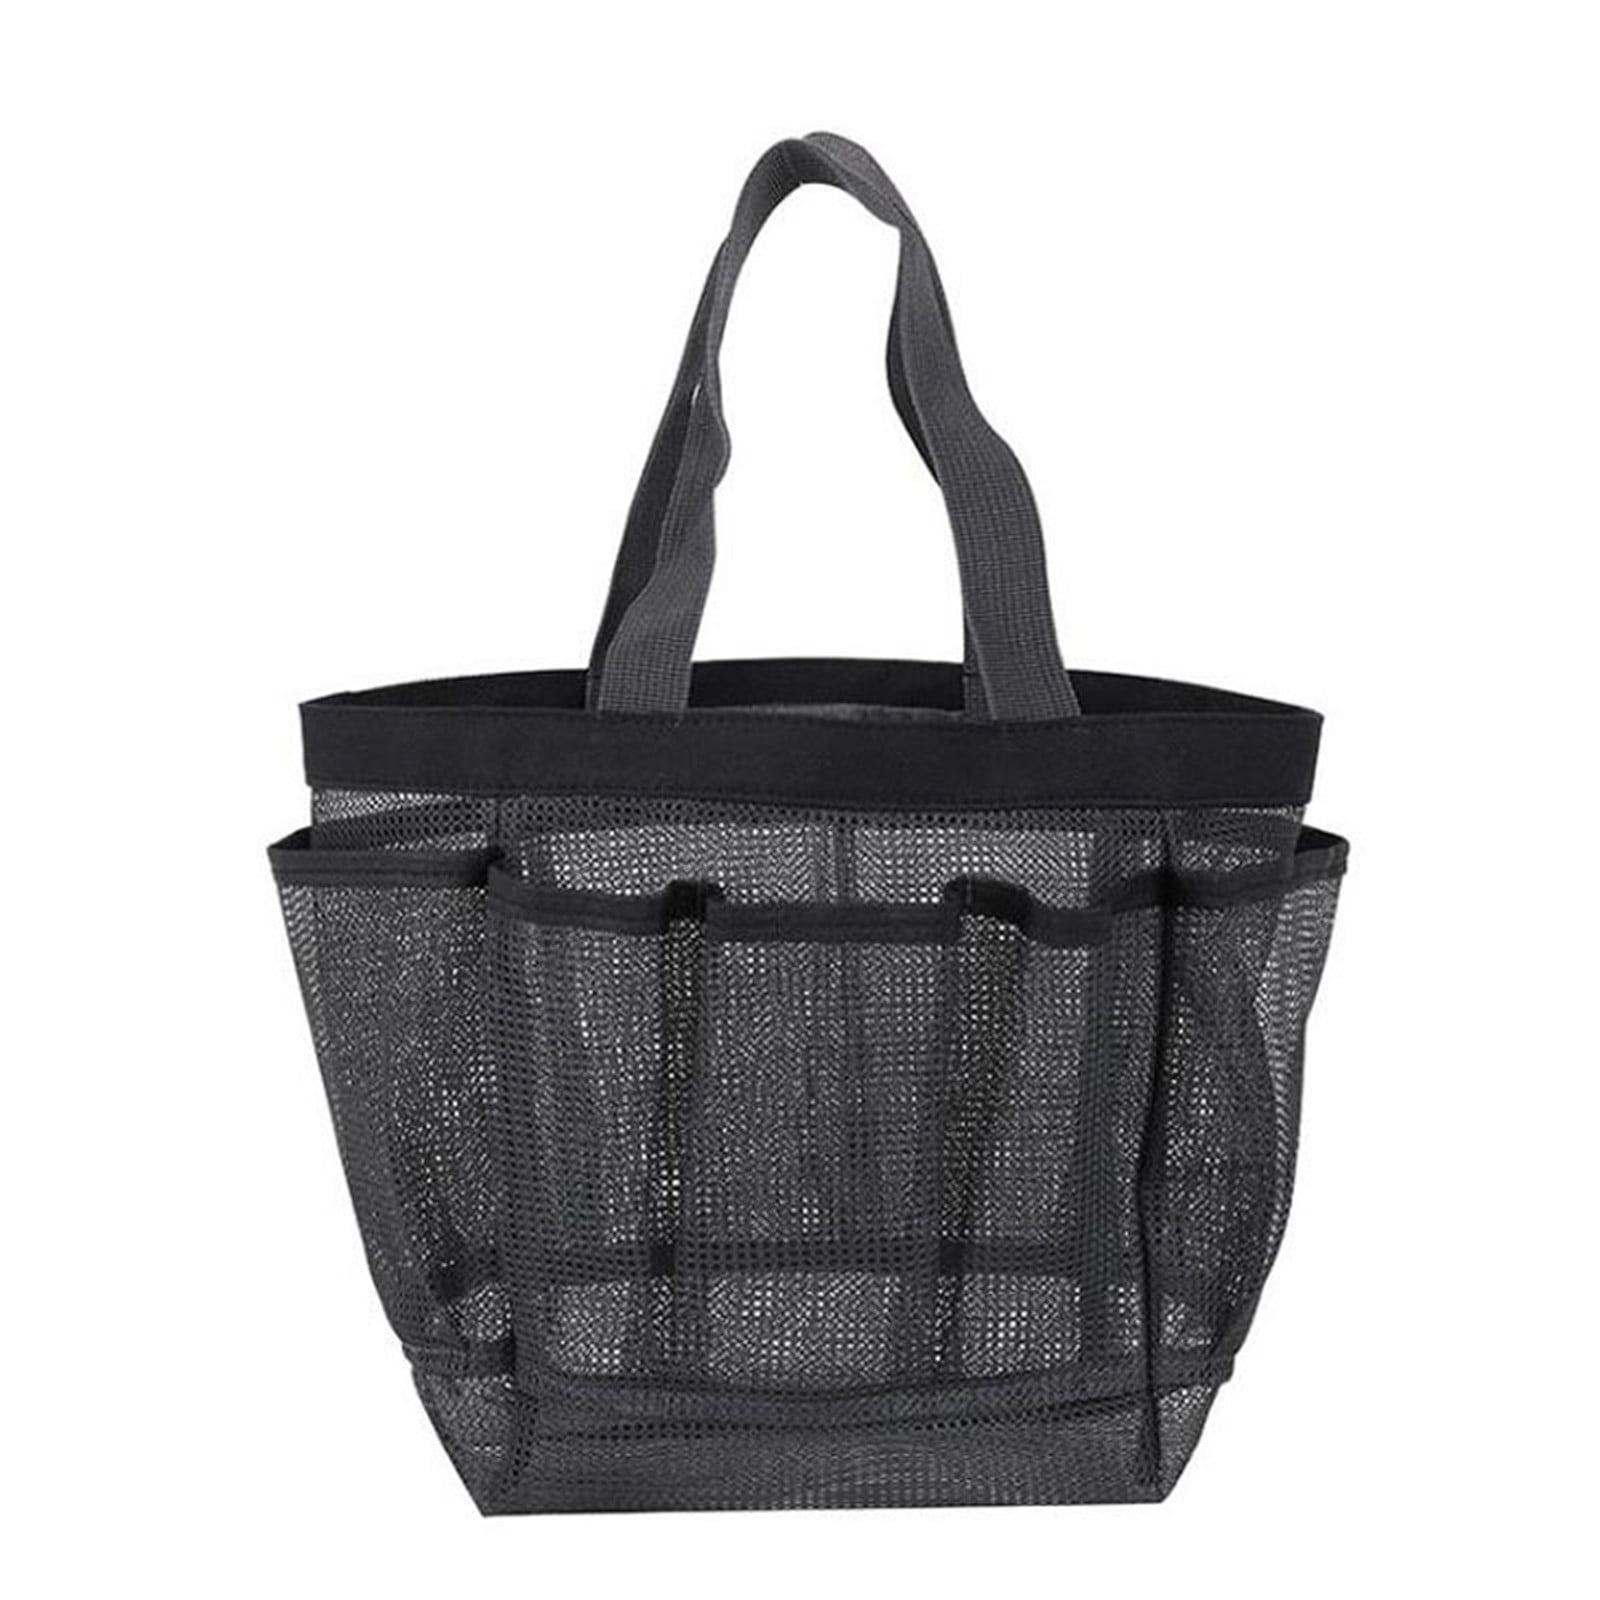 Portable Shower Caddy Tote Plastic Storage Basket With Handle Bath